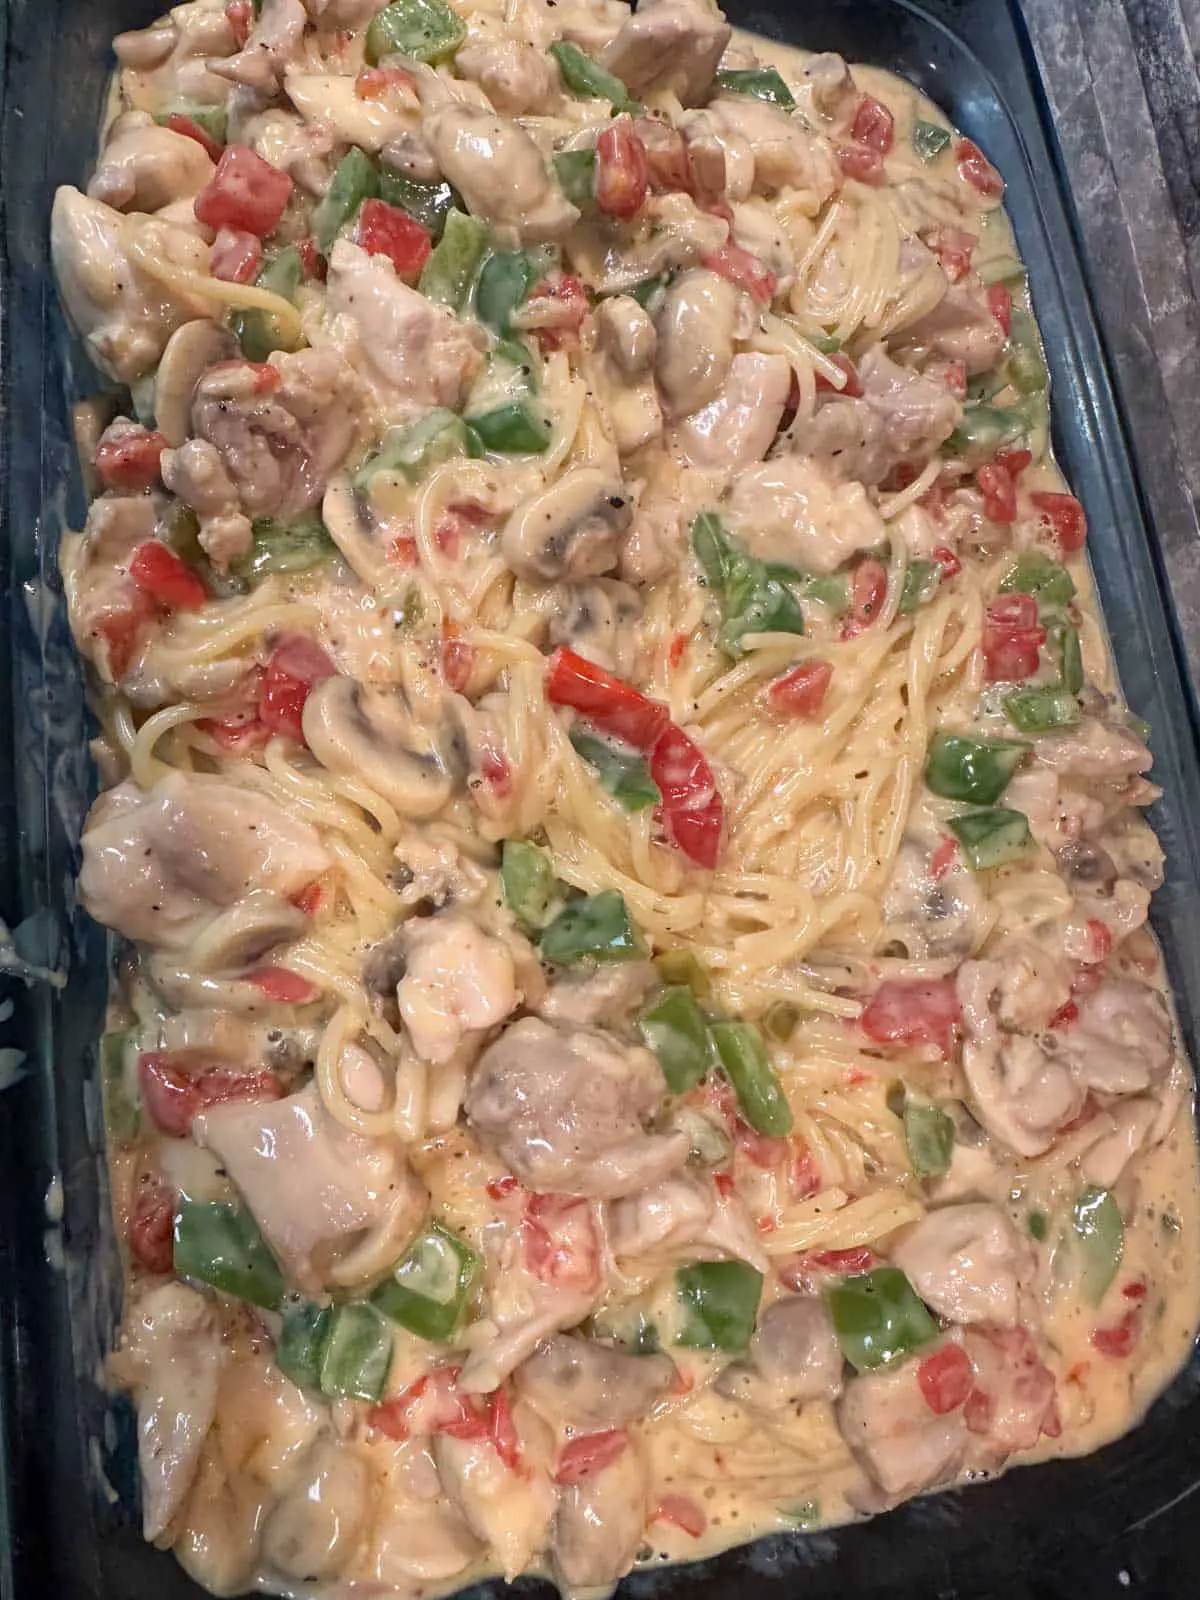 A glass casserole dish containing spaghetti, mushrooms, tomatoes, green bell peppers, and chilies in a creamy and cheesy sauce.